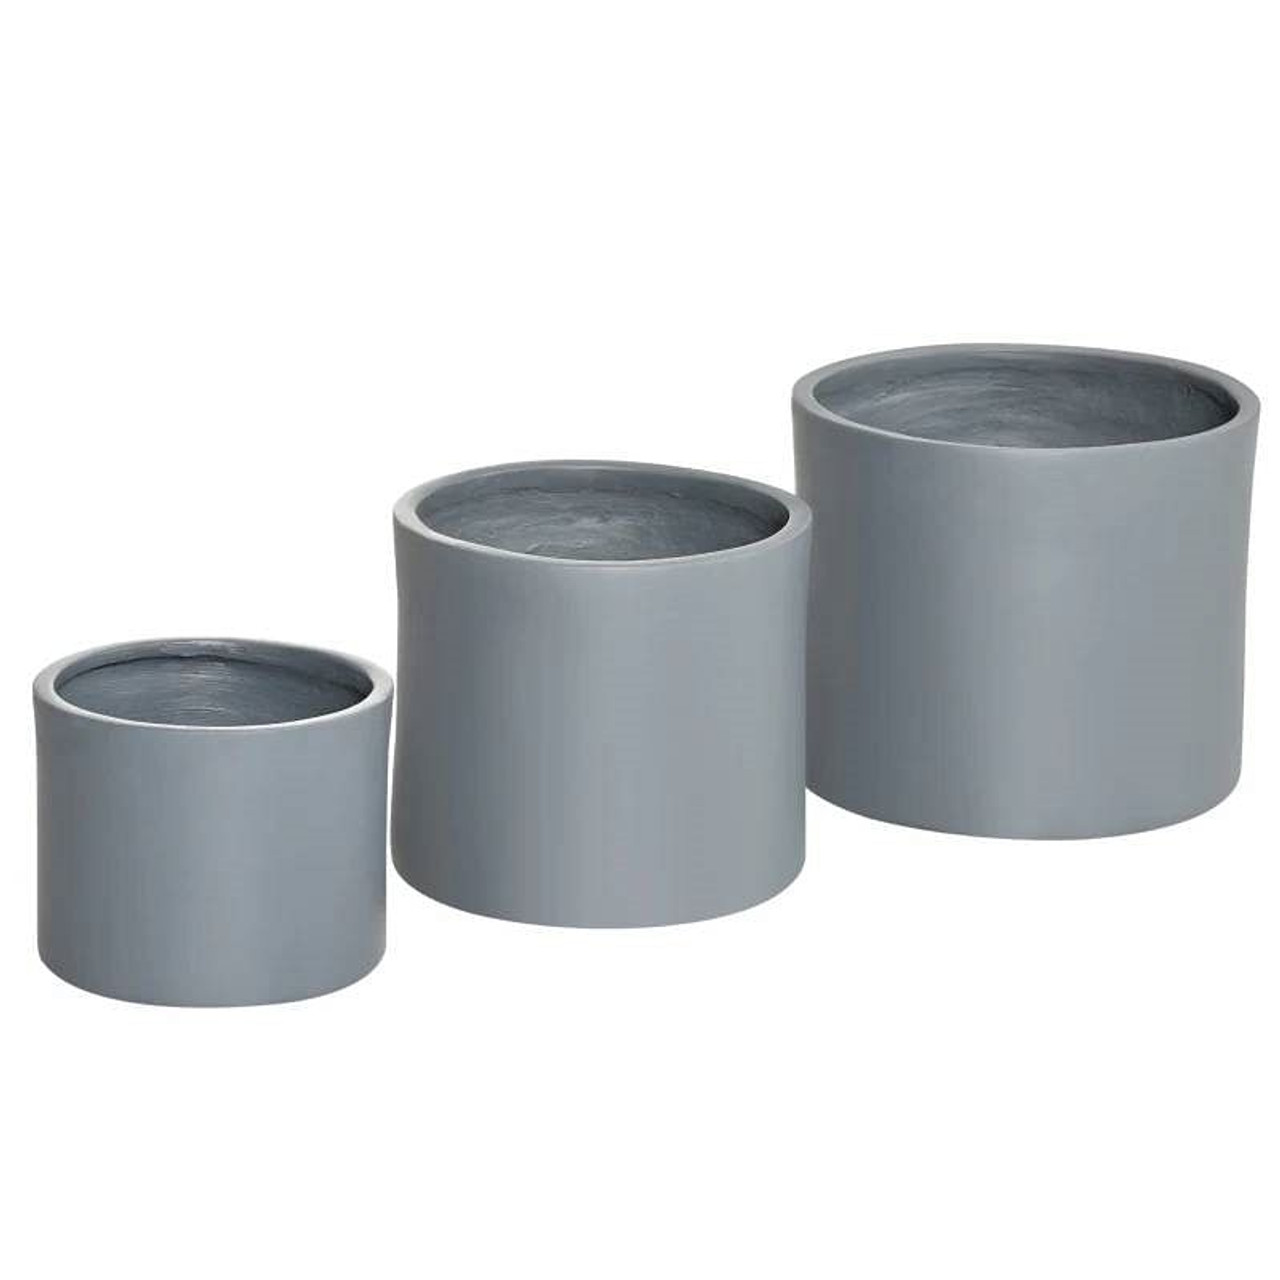 Set of 3 Stackable Round Outdoor Flower Pot Planters with Drainage Holes in Grey